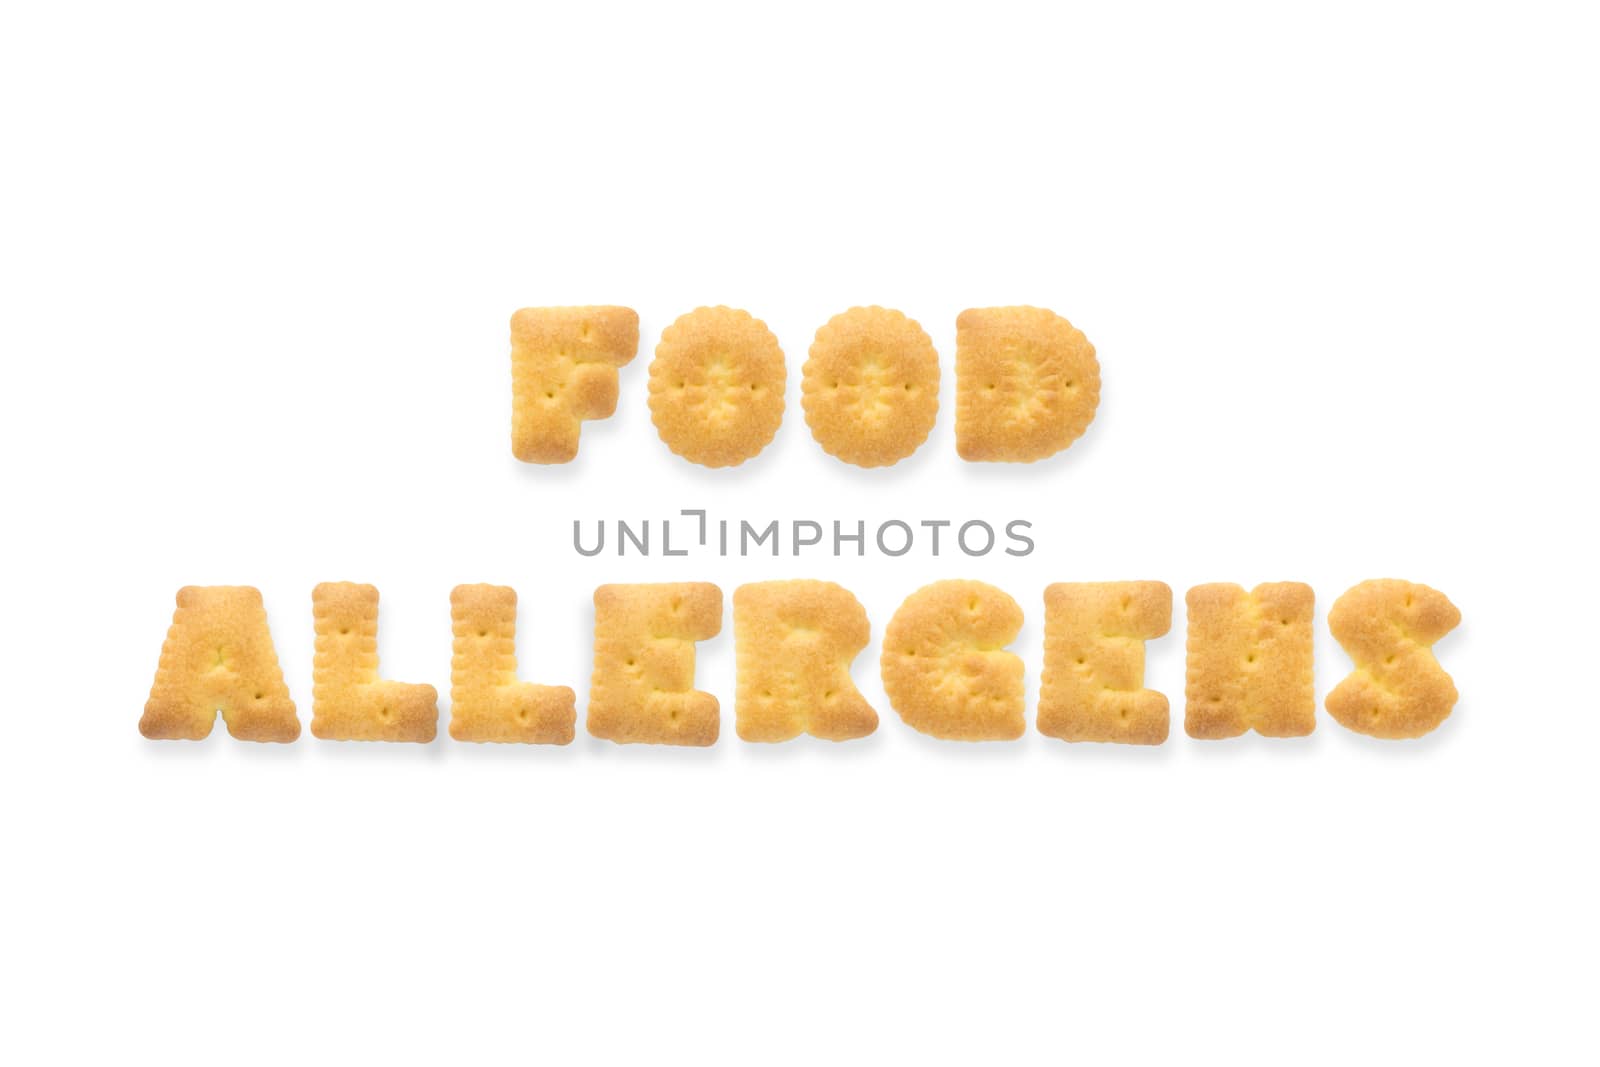 Collage of the capital letters word FOOD ALLERGENS. Alphabet cookie biscuits isolated on white background